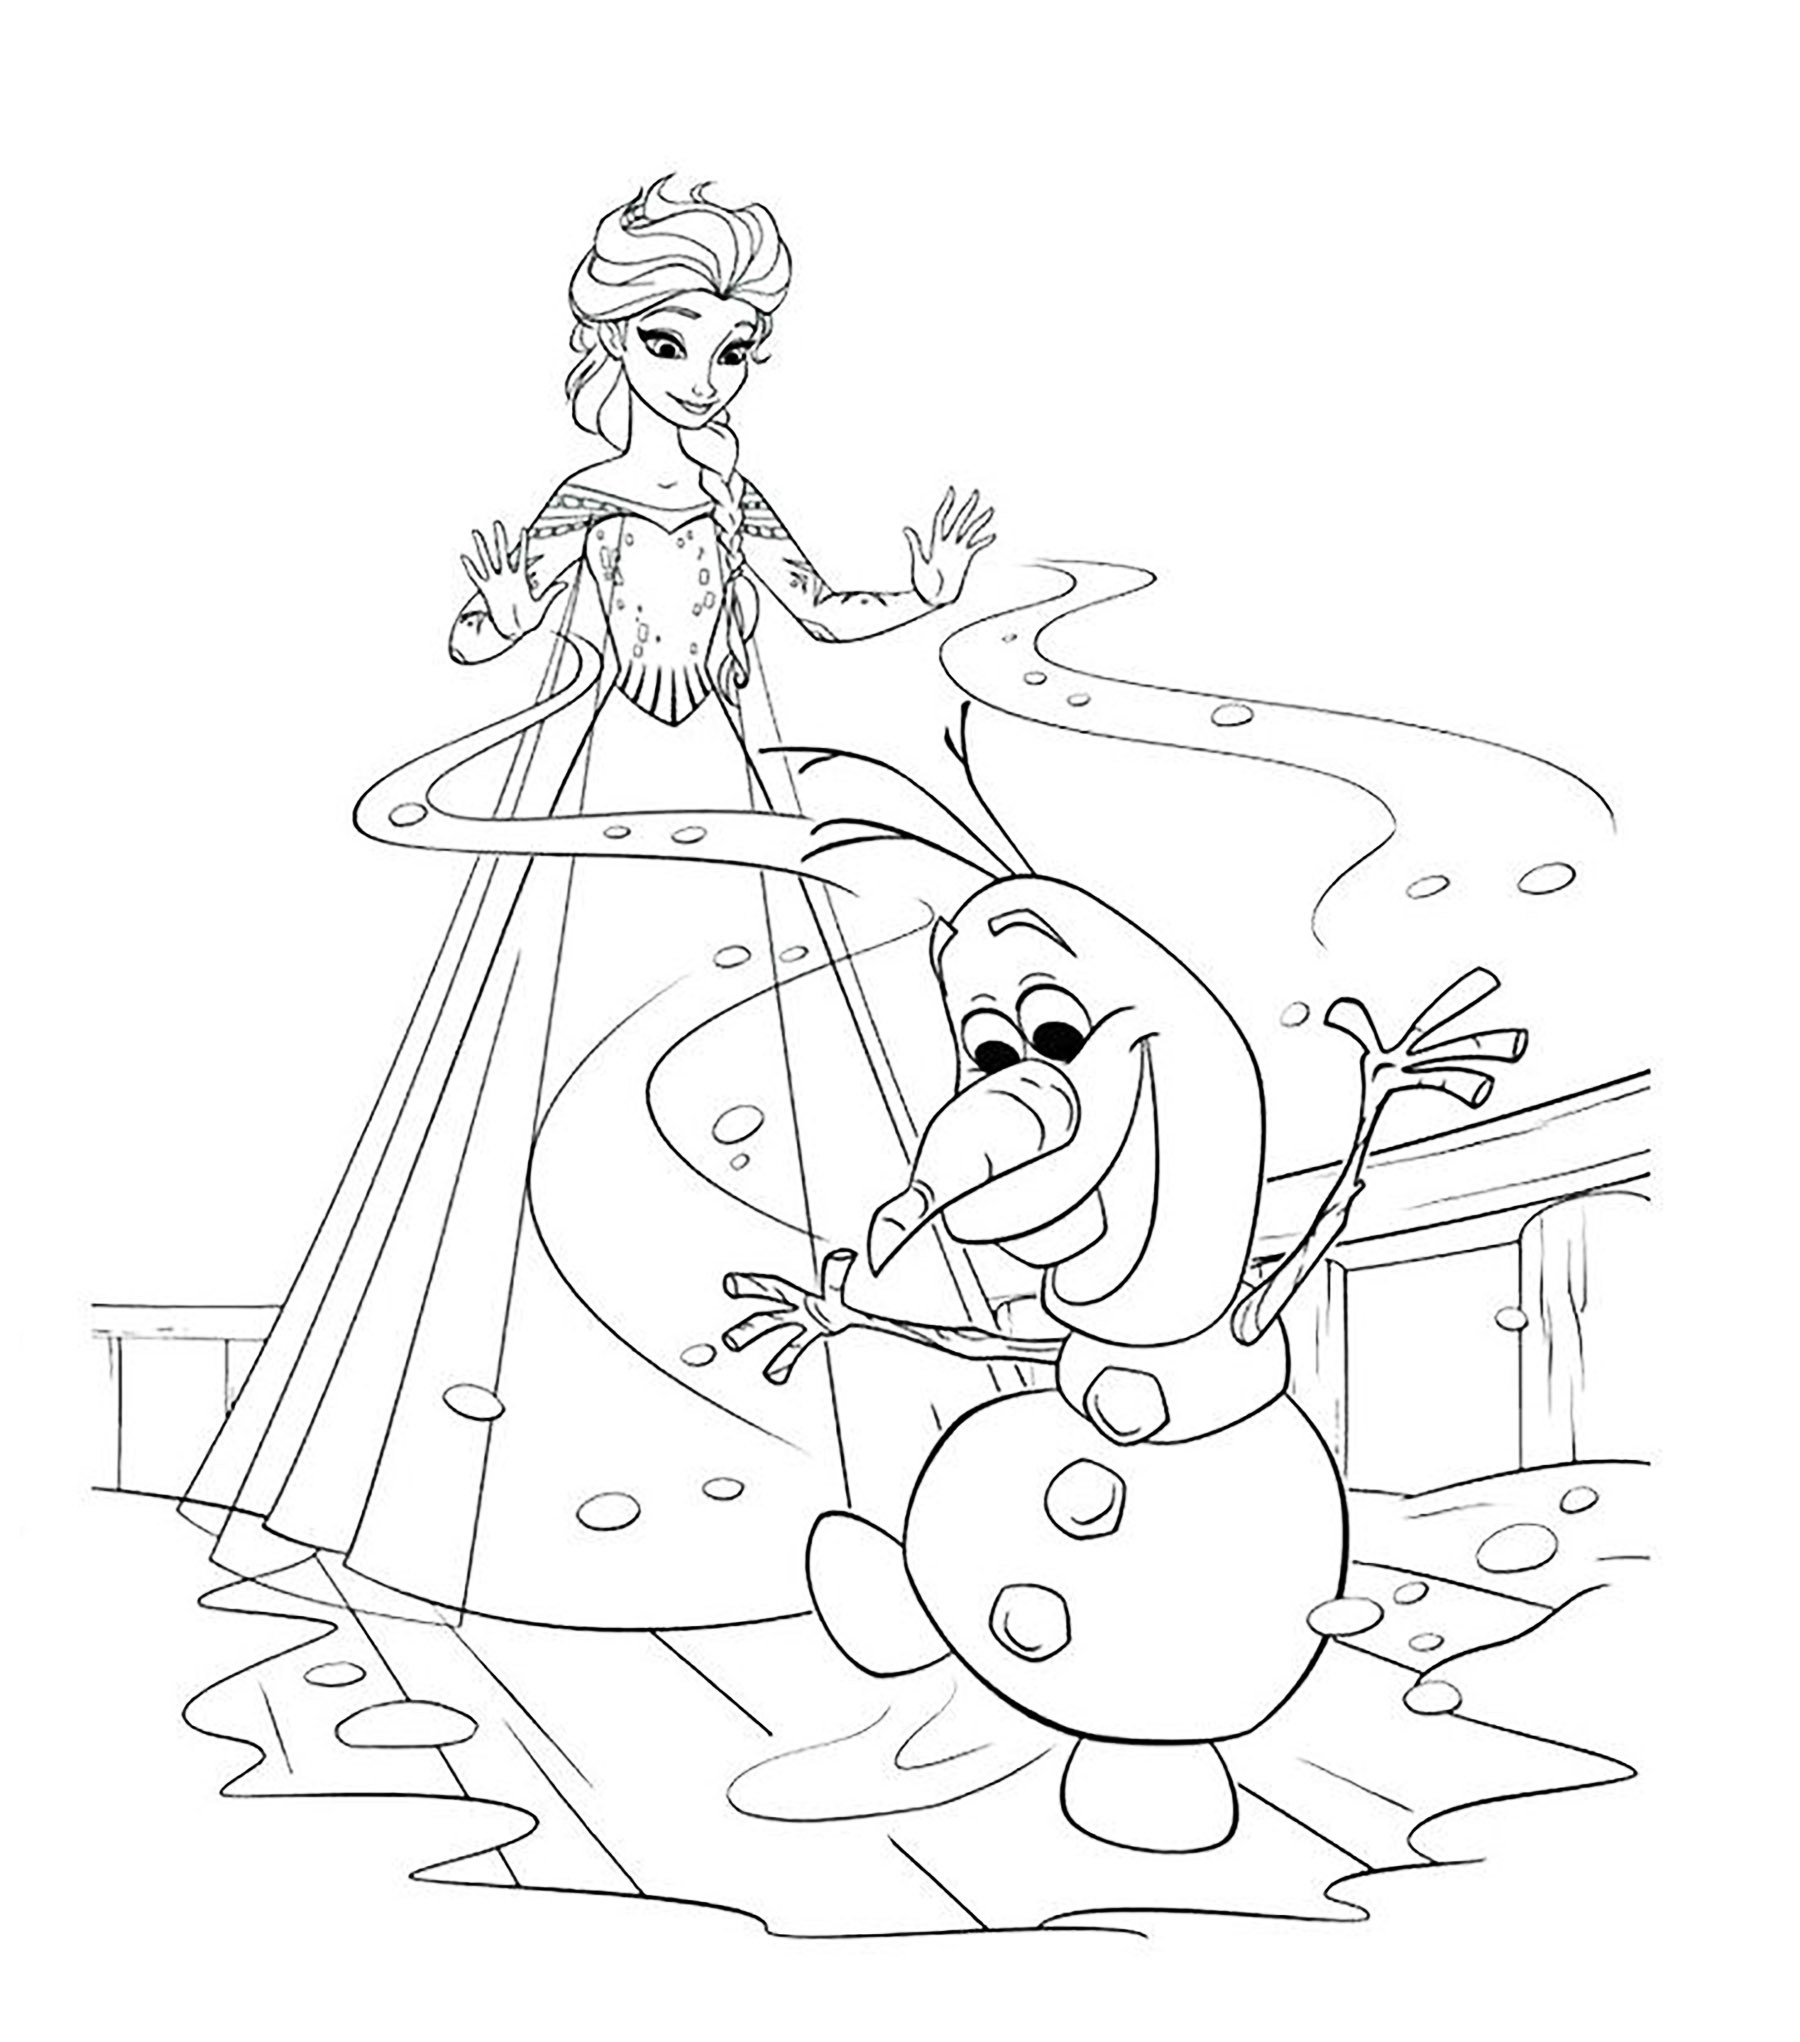 Frozen Coloring Pages For Kids
 Frozen free to color for children Frozen Kids Coloring Pages